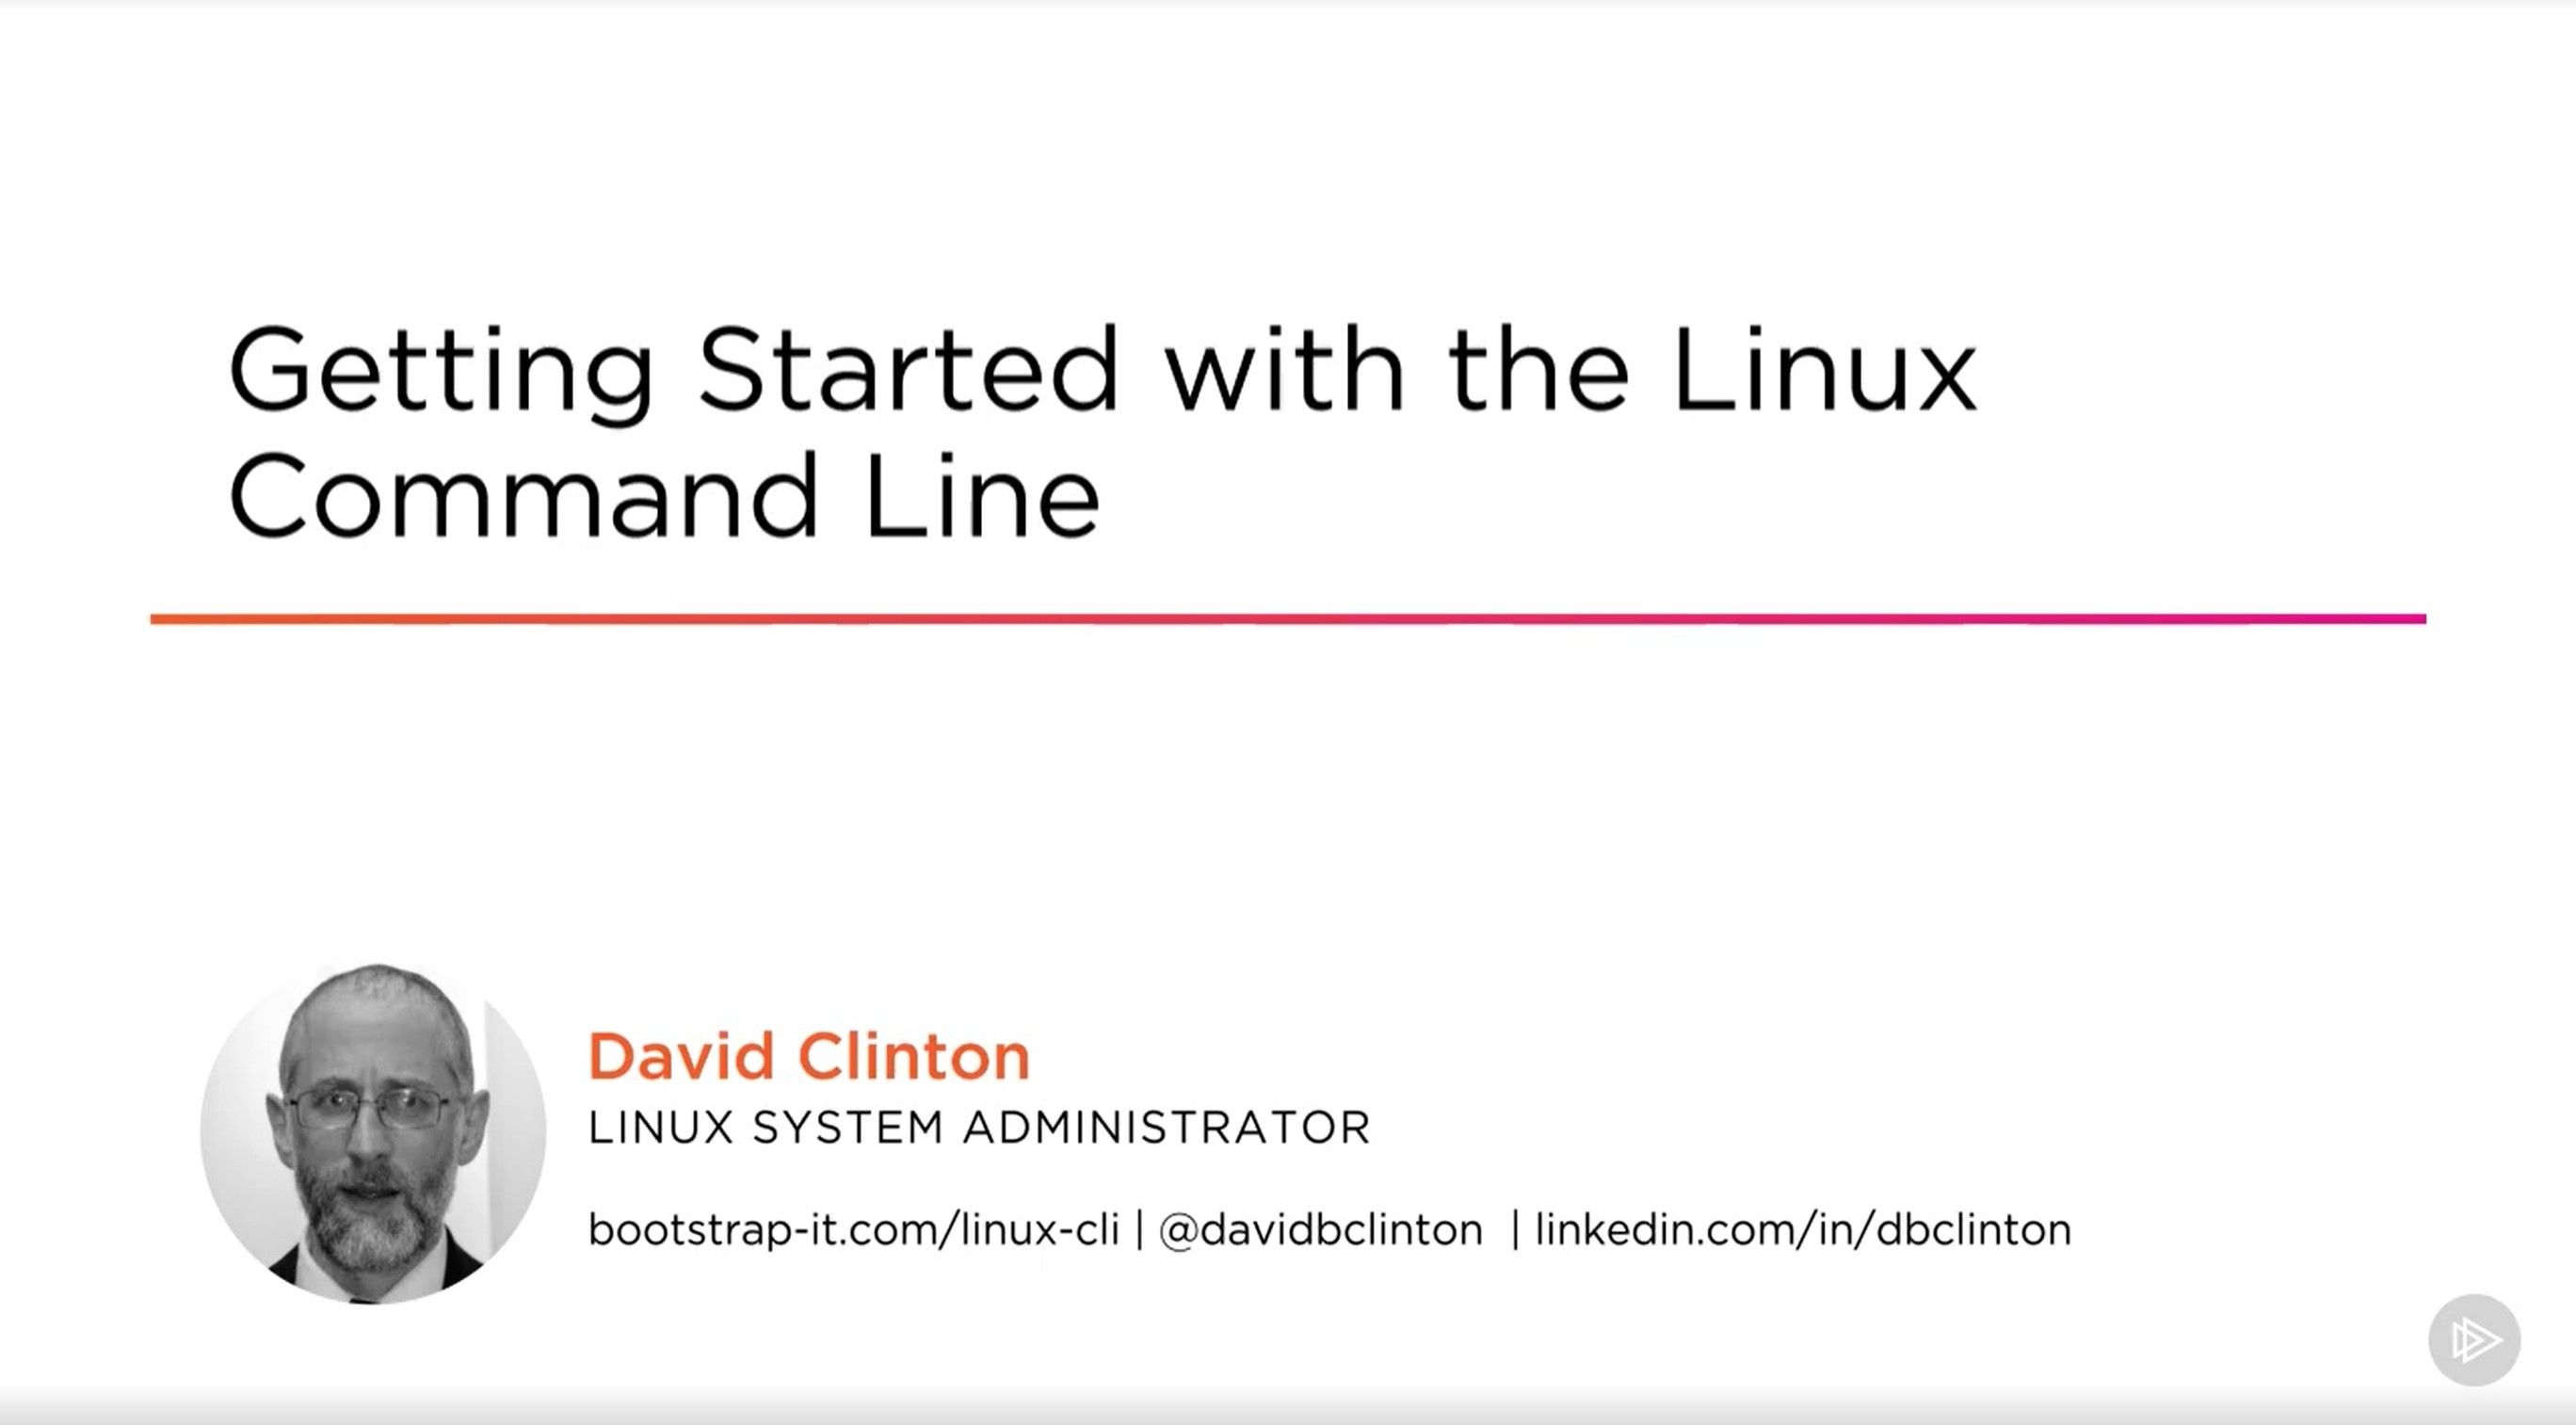 Getting started Linux